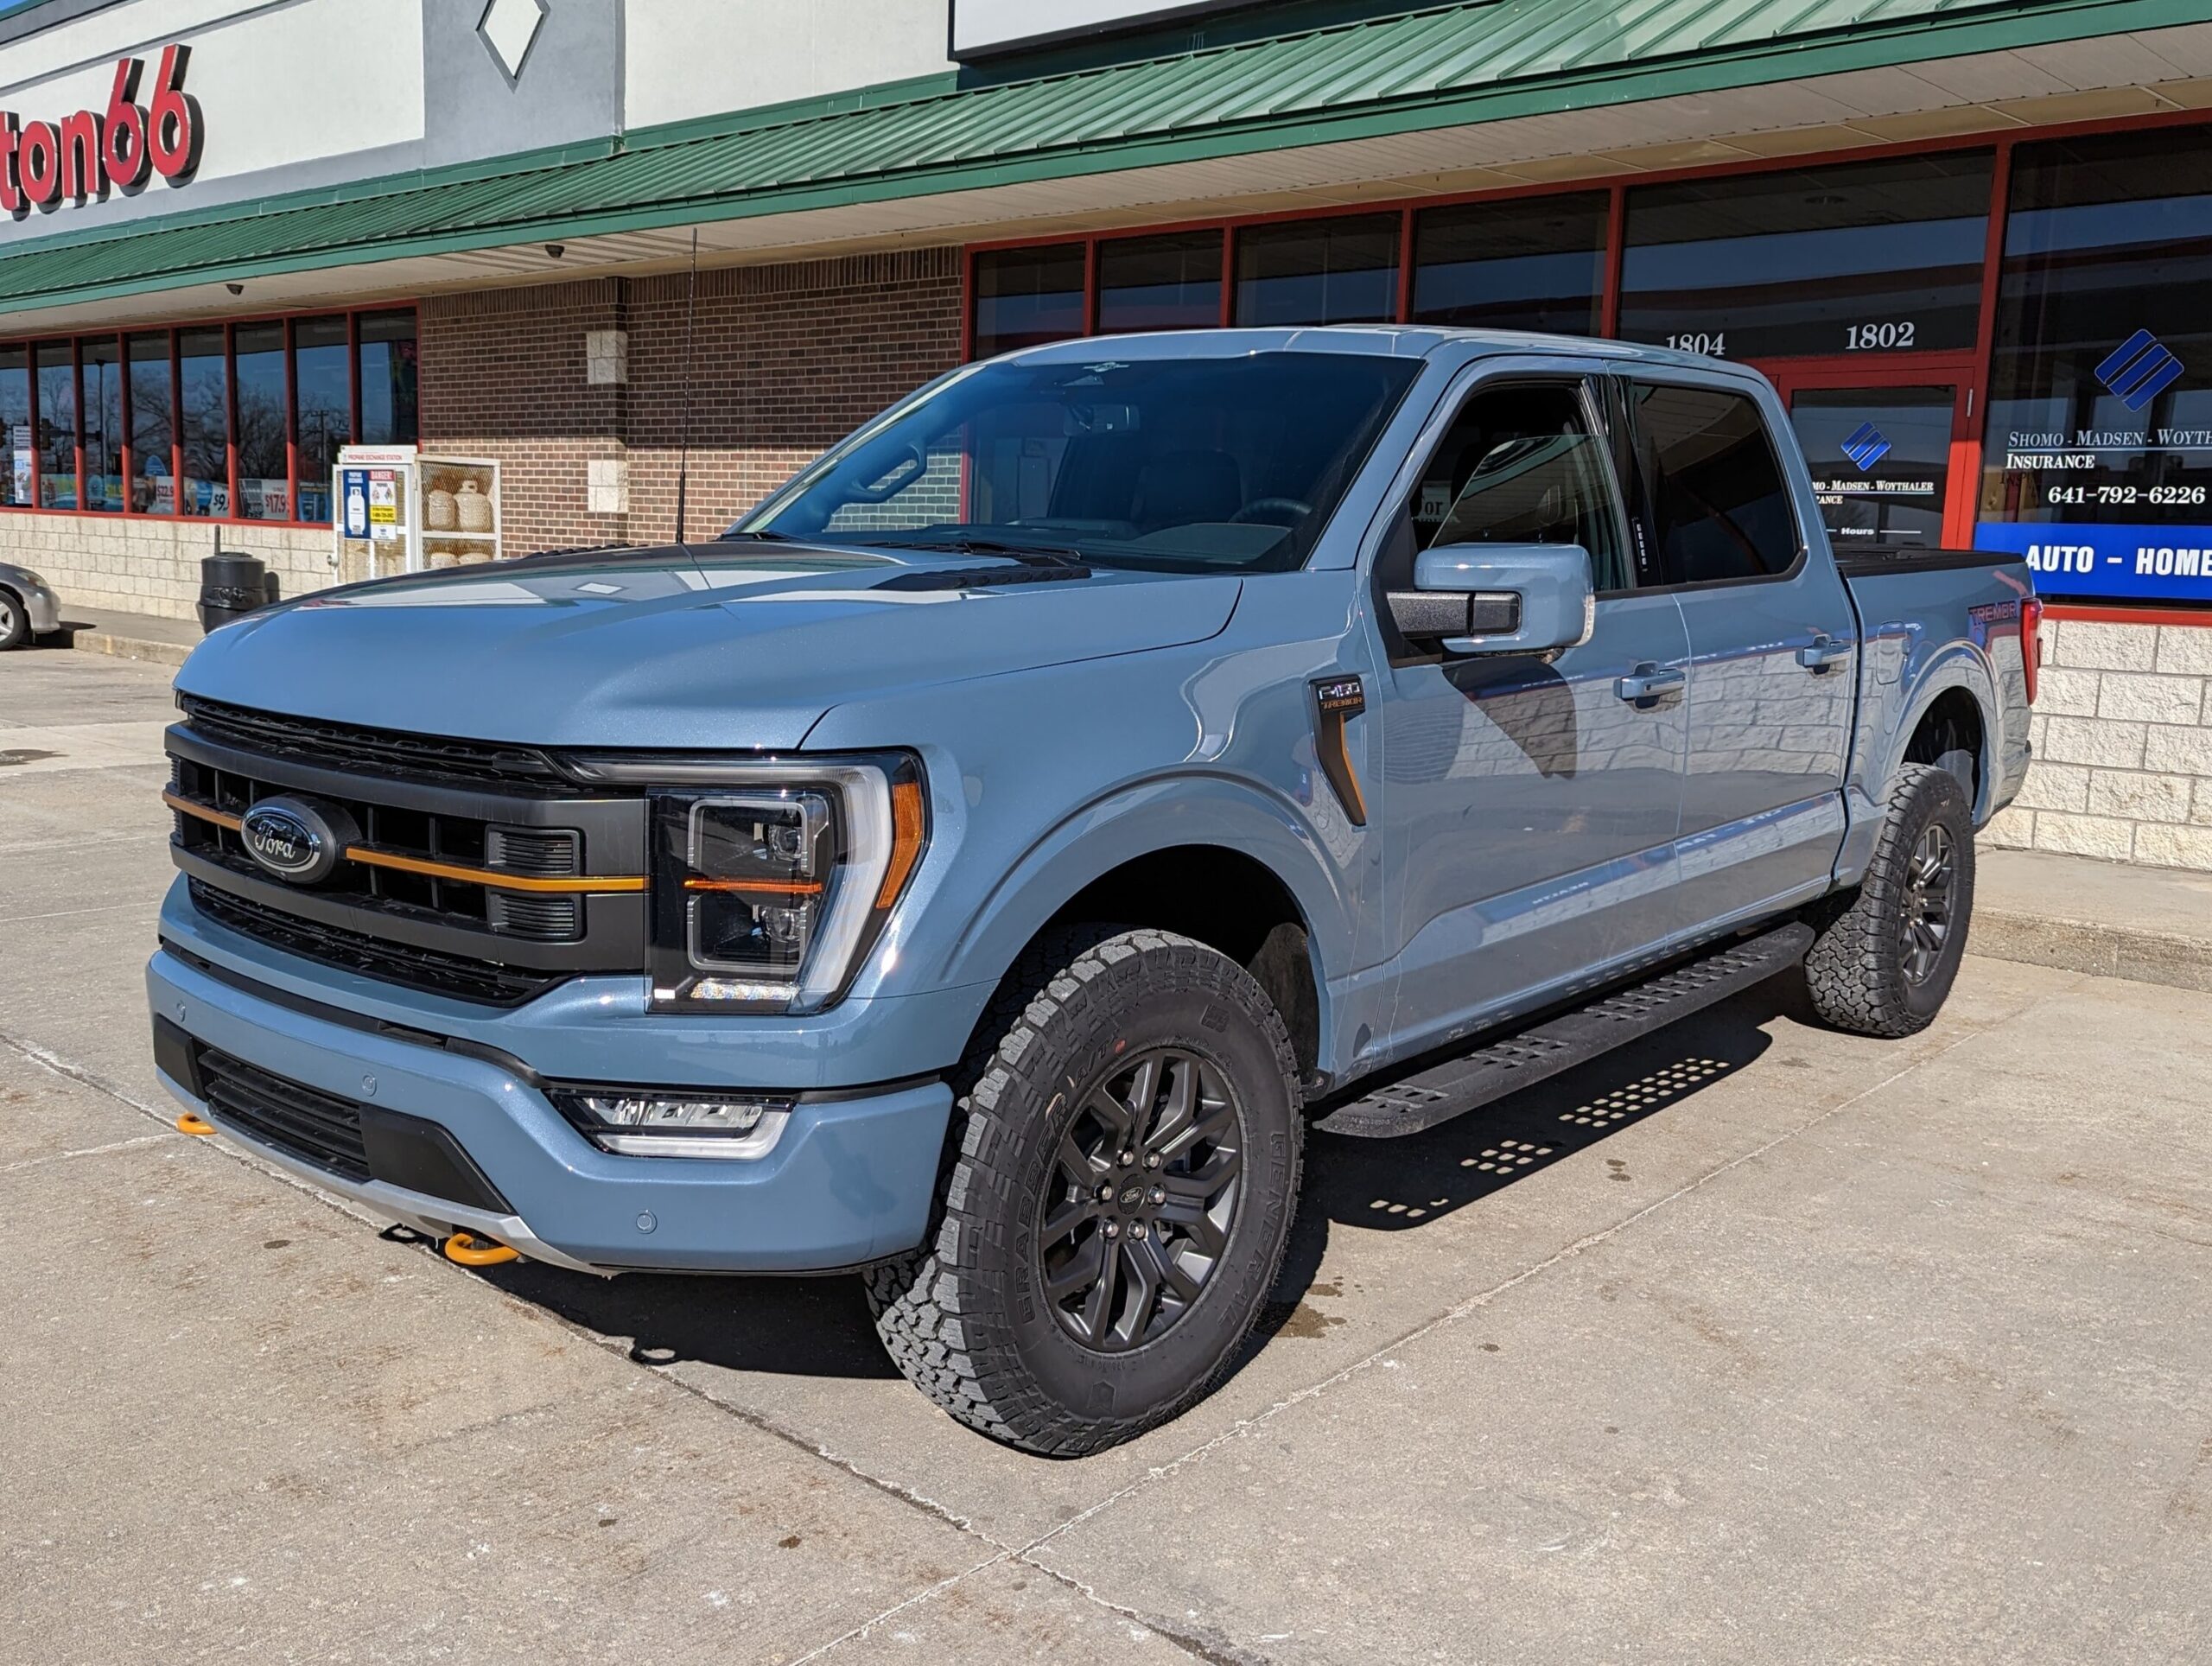 Another positive Tremor delivery at Granger Ford (in Azure Gray